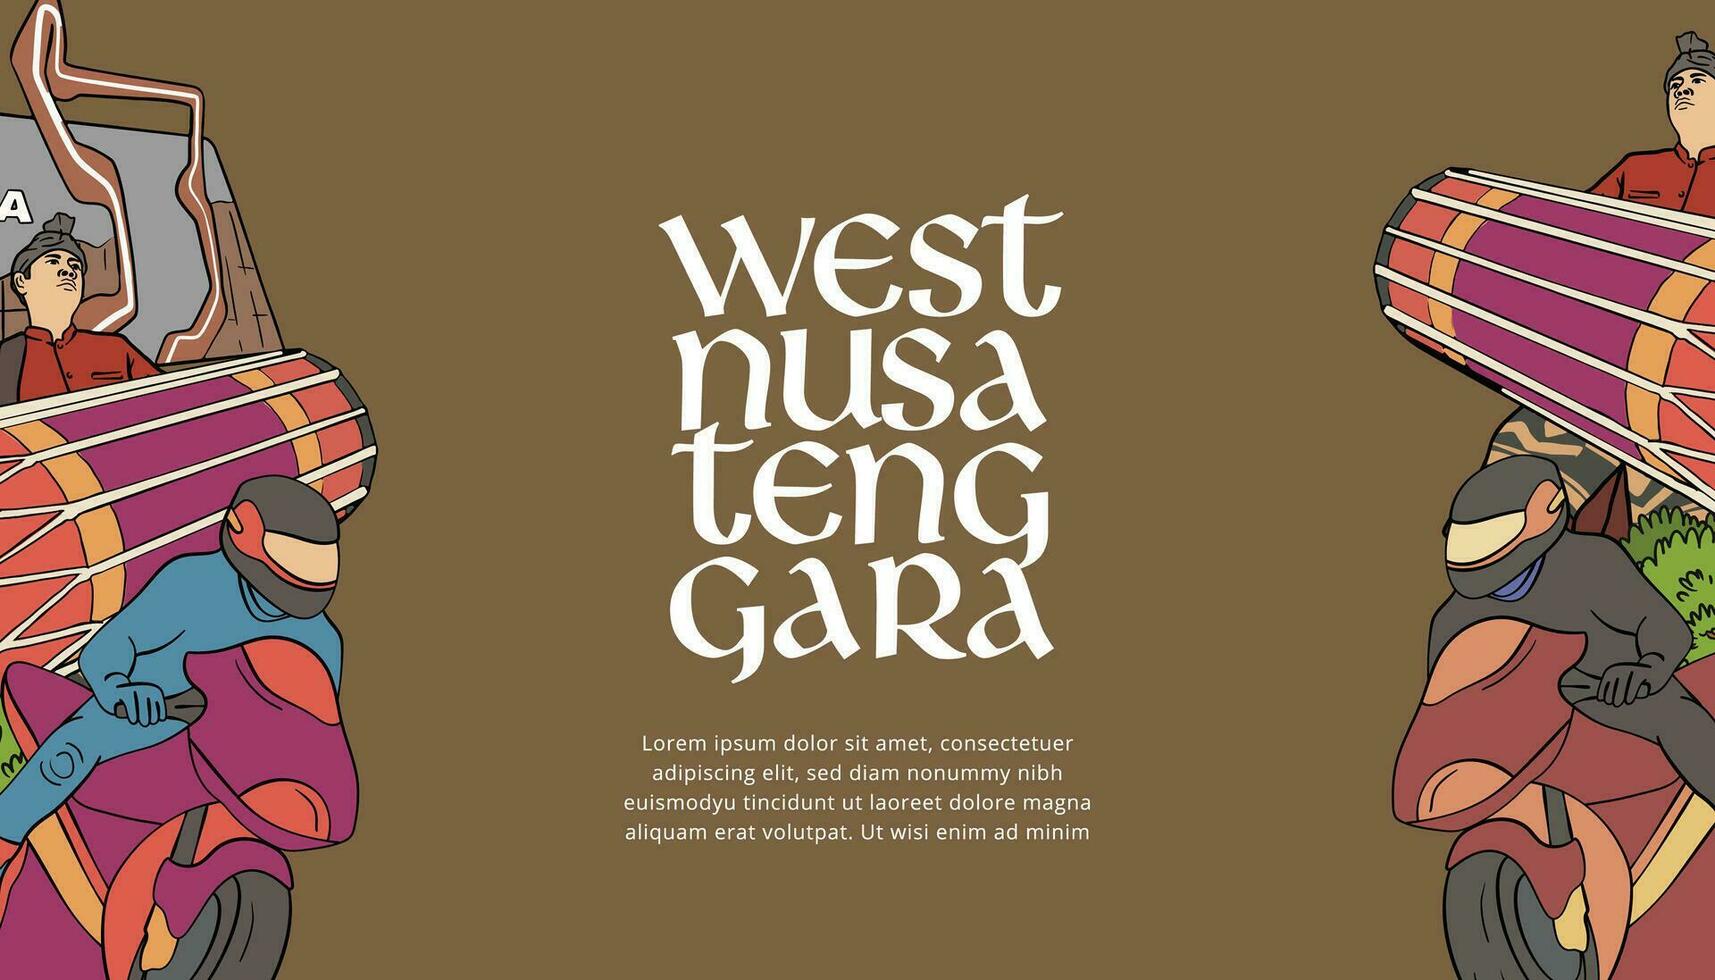 Vintage Indonesia West Nusa Tenggara design layout idea for social media or event poster vector